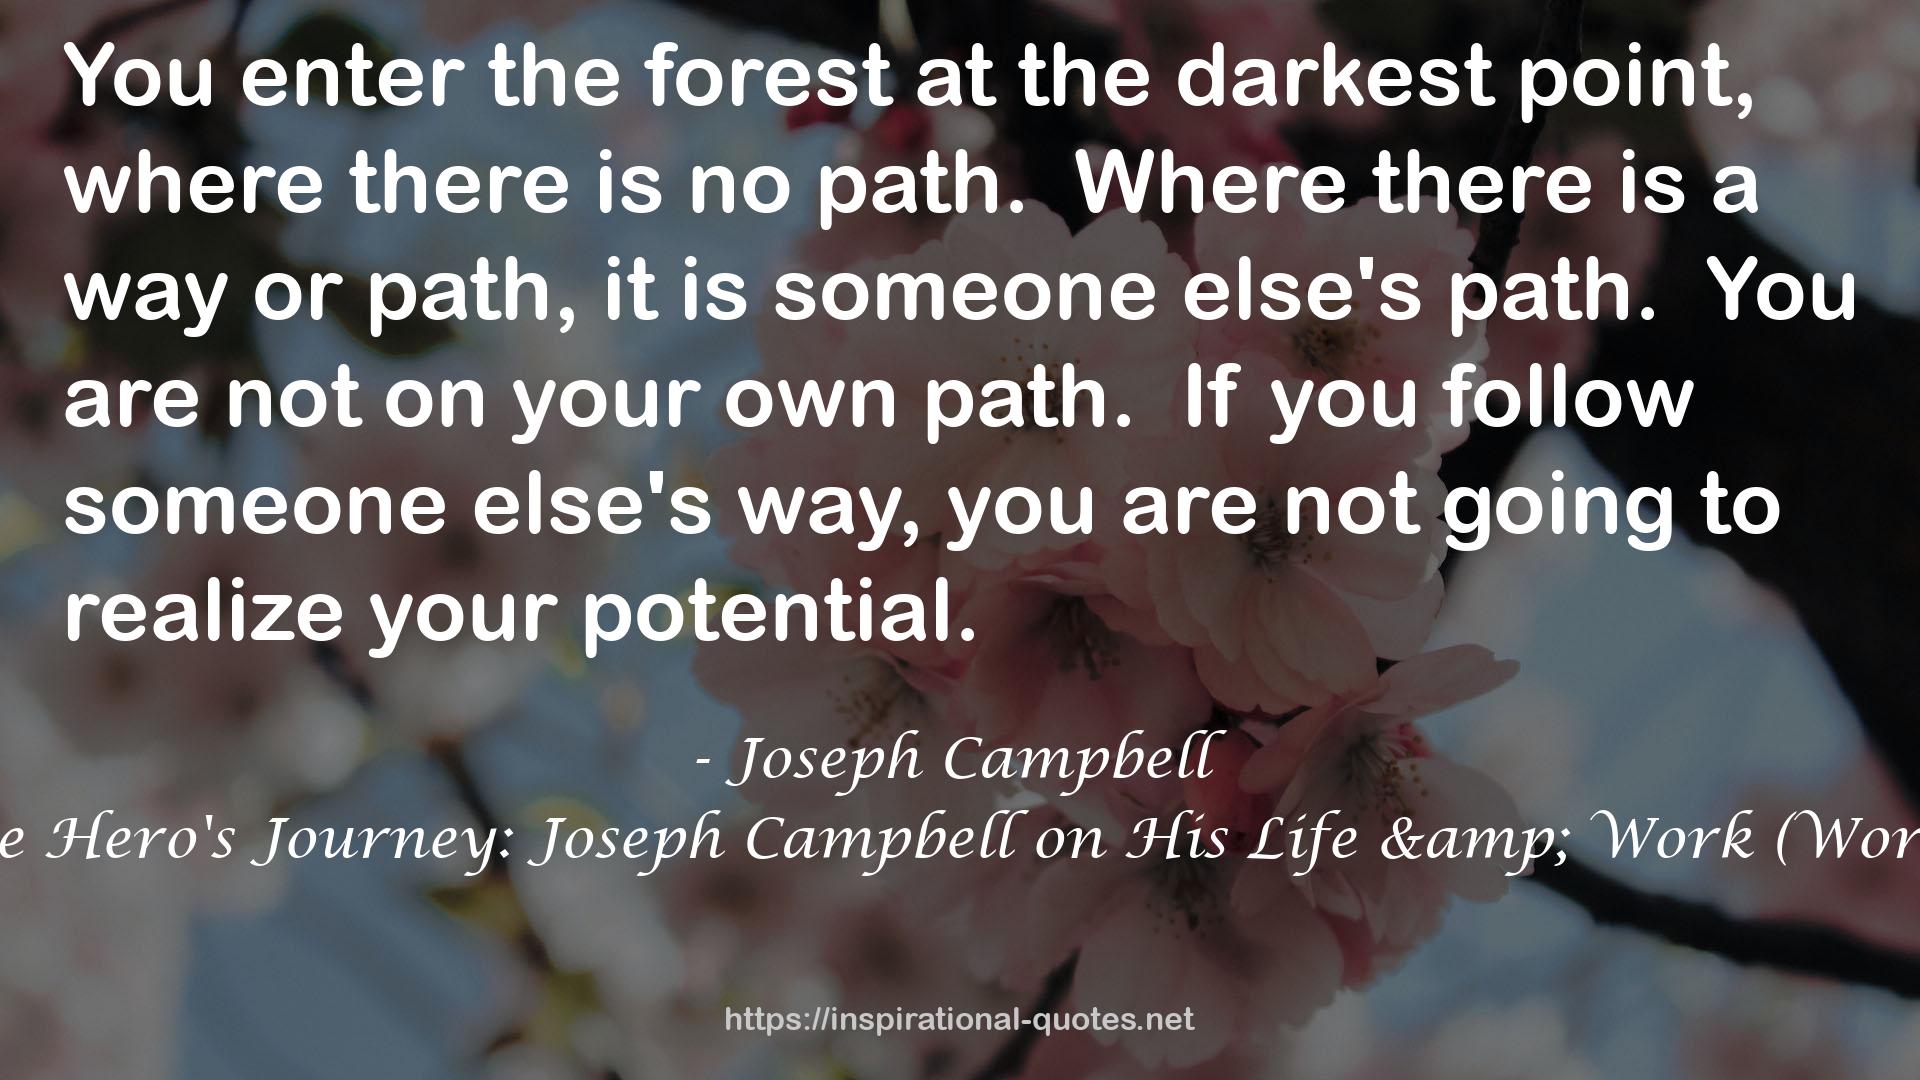 The Hero's Journey: Joseph Campbell on His Life & Work (Works) QUOTES